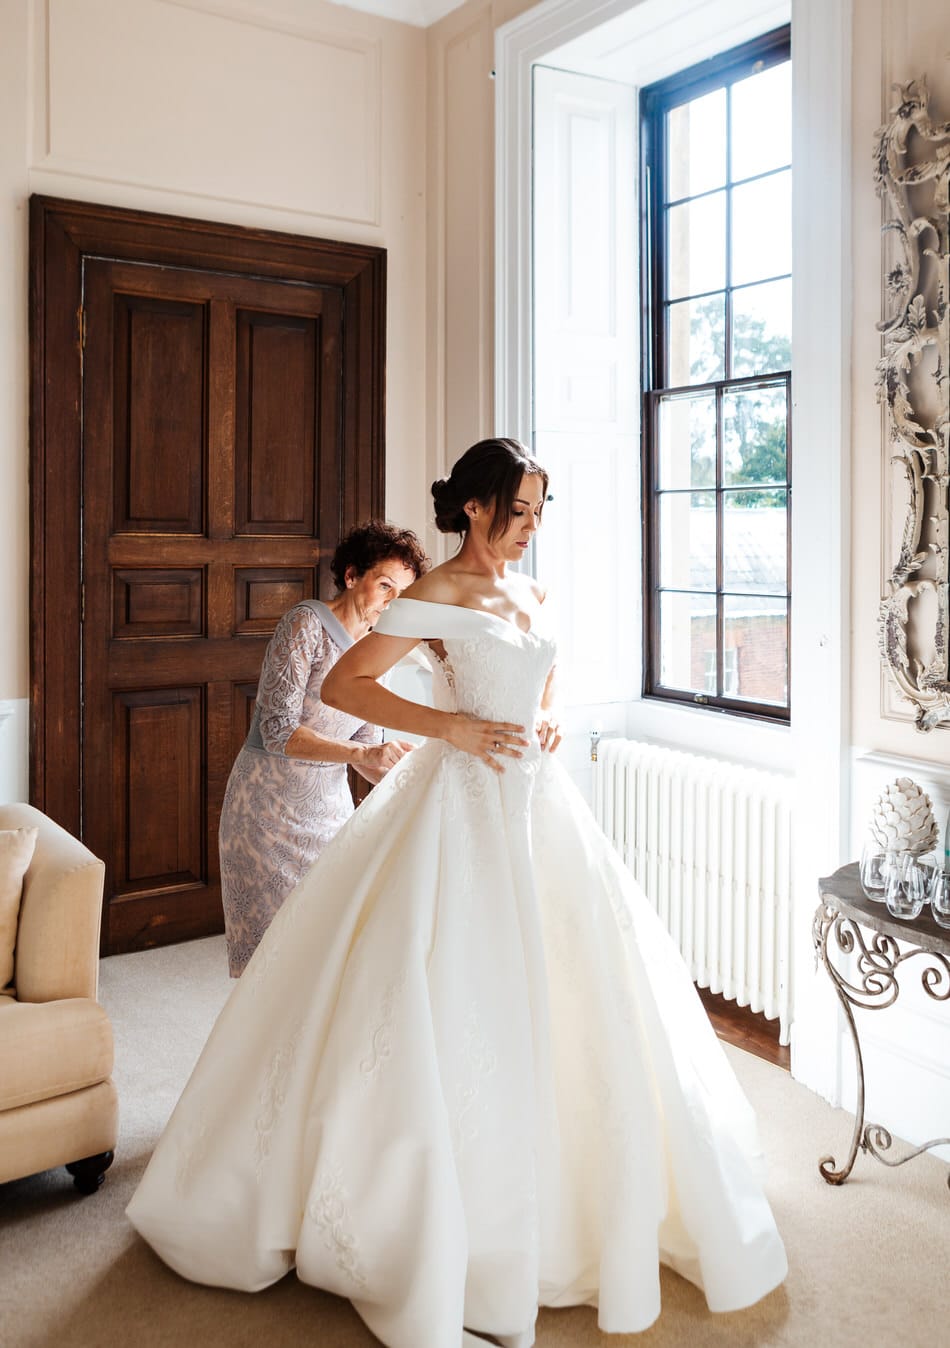 Mother of the Bride, helps the Bride button up her princess style wedding dress